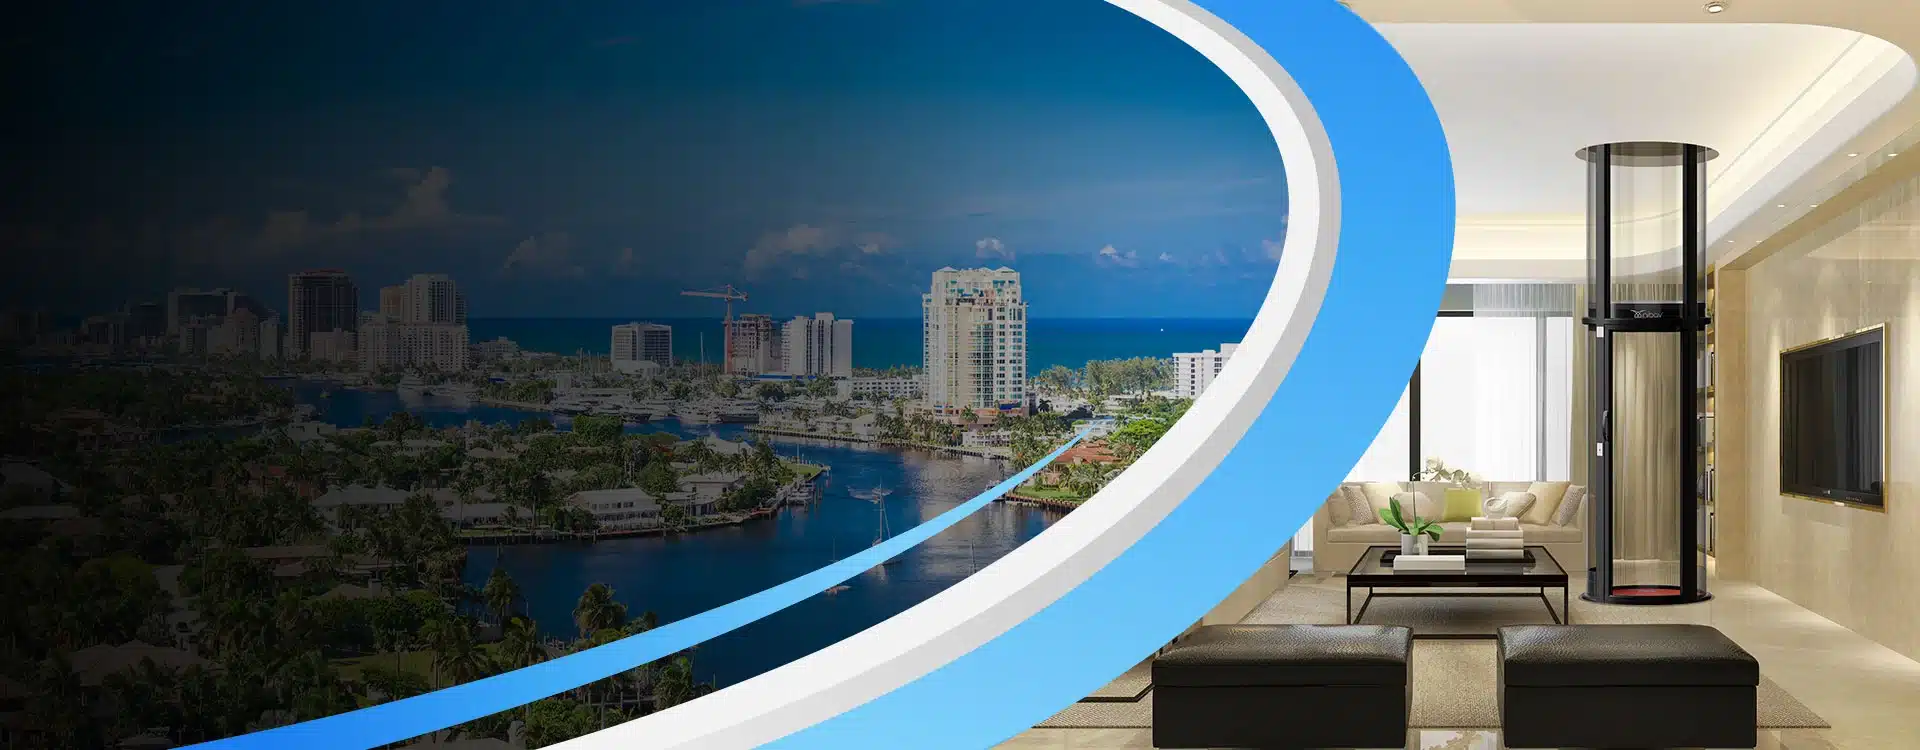 Home Elevators in Fort Lauderdale - Nibav Lifts USA